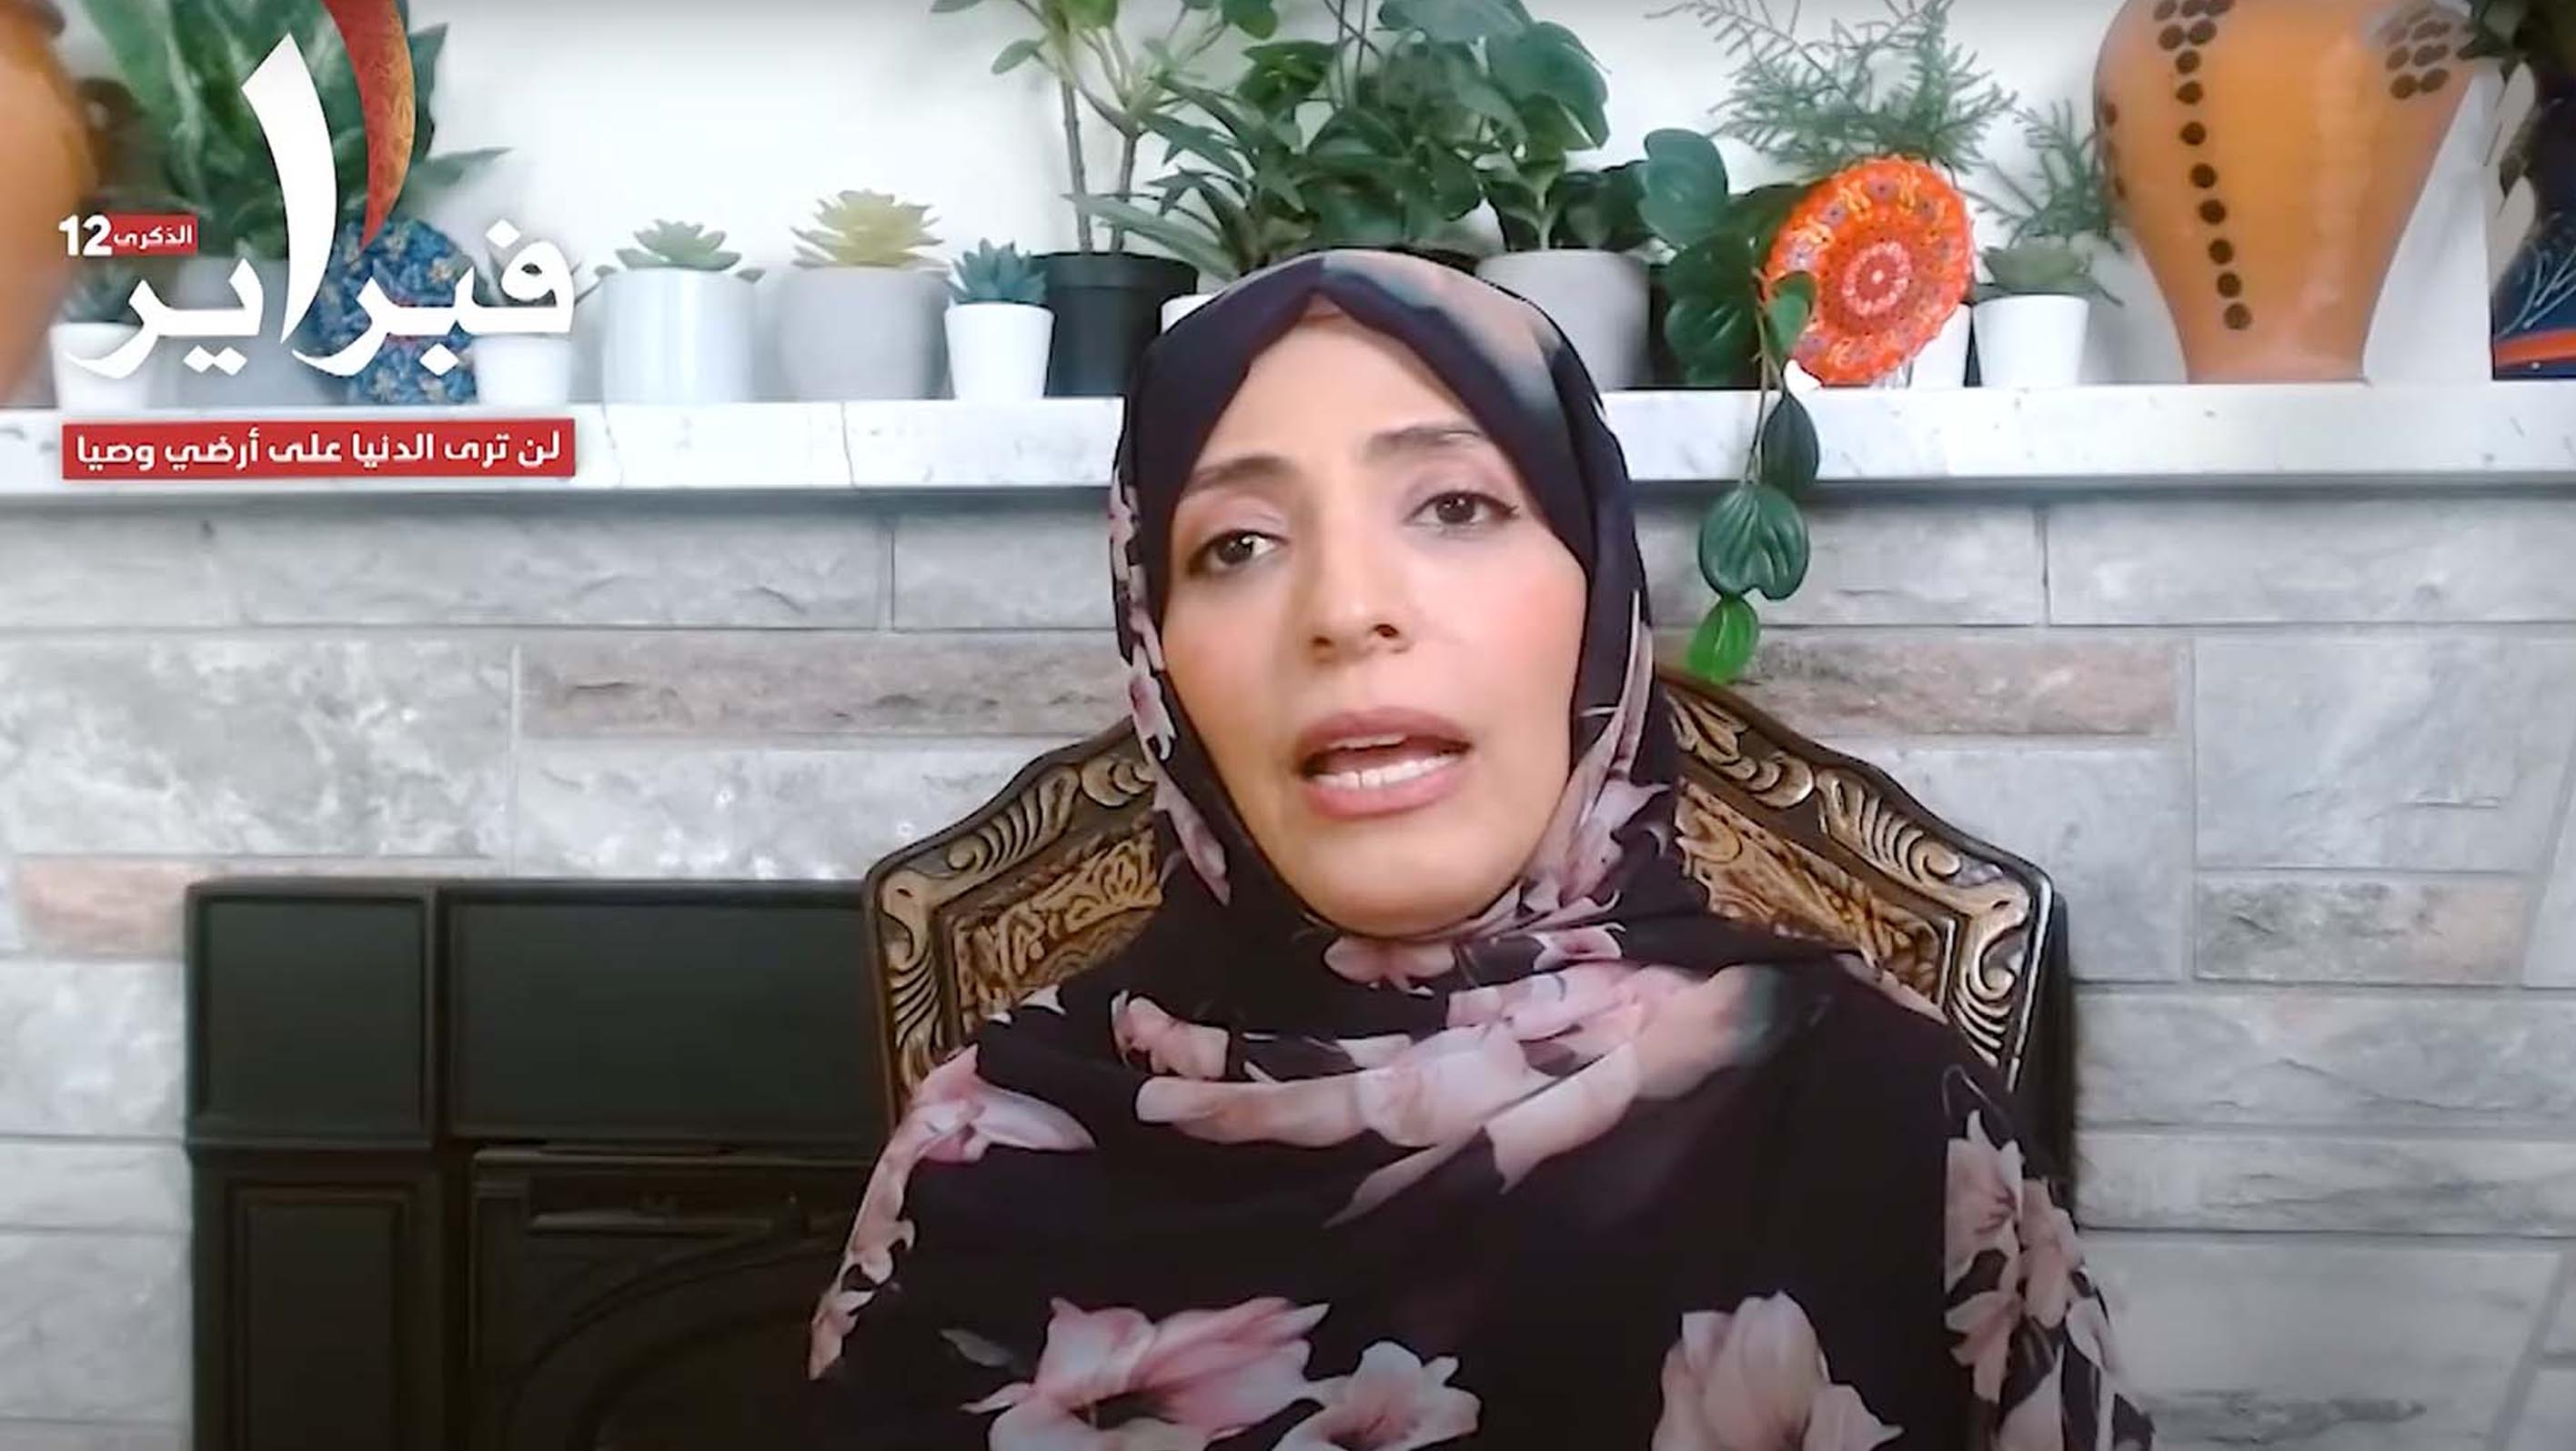 On 12th anniversary of Youth Revolution, Tawakkol Karman reiterates continued February project